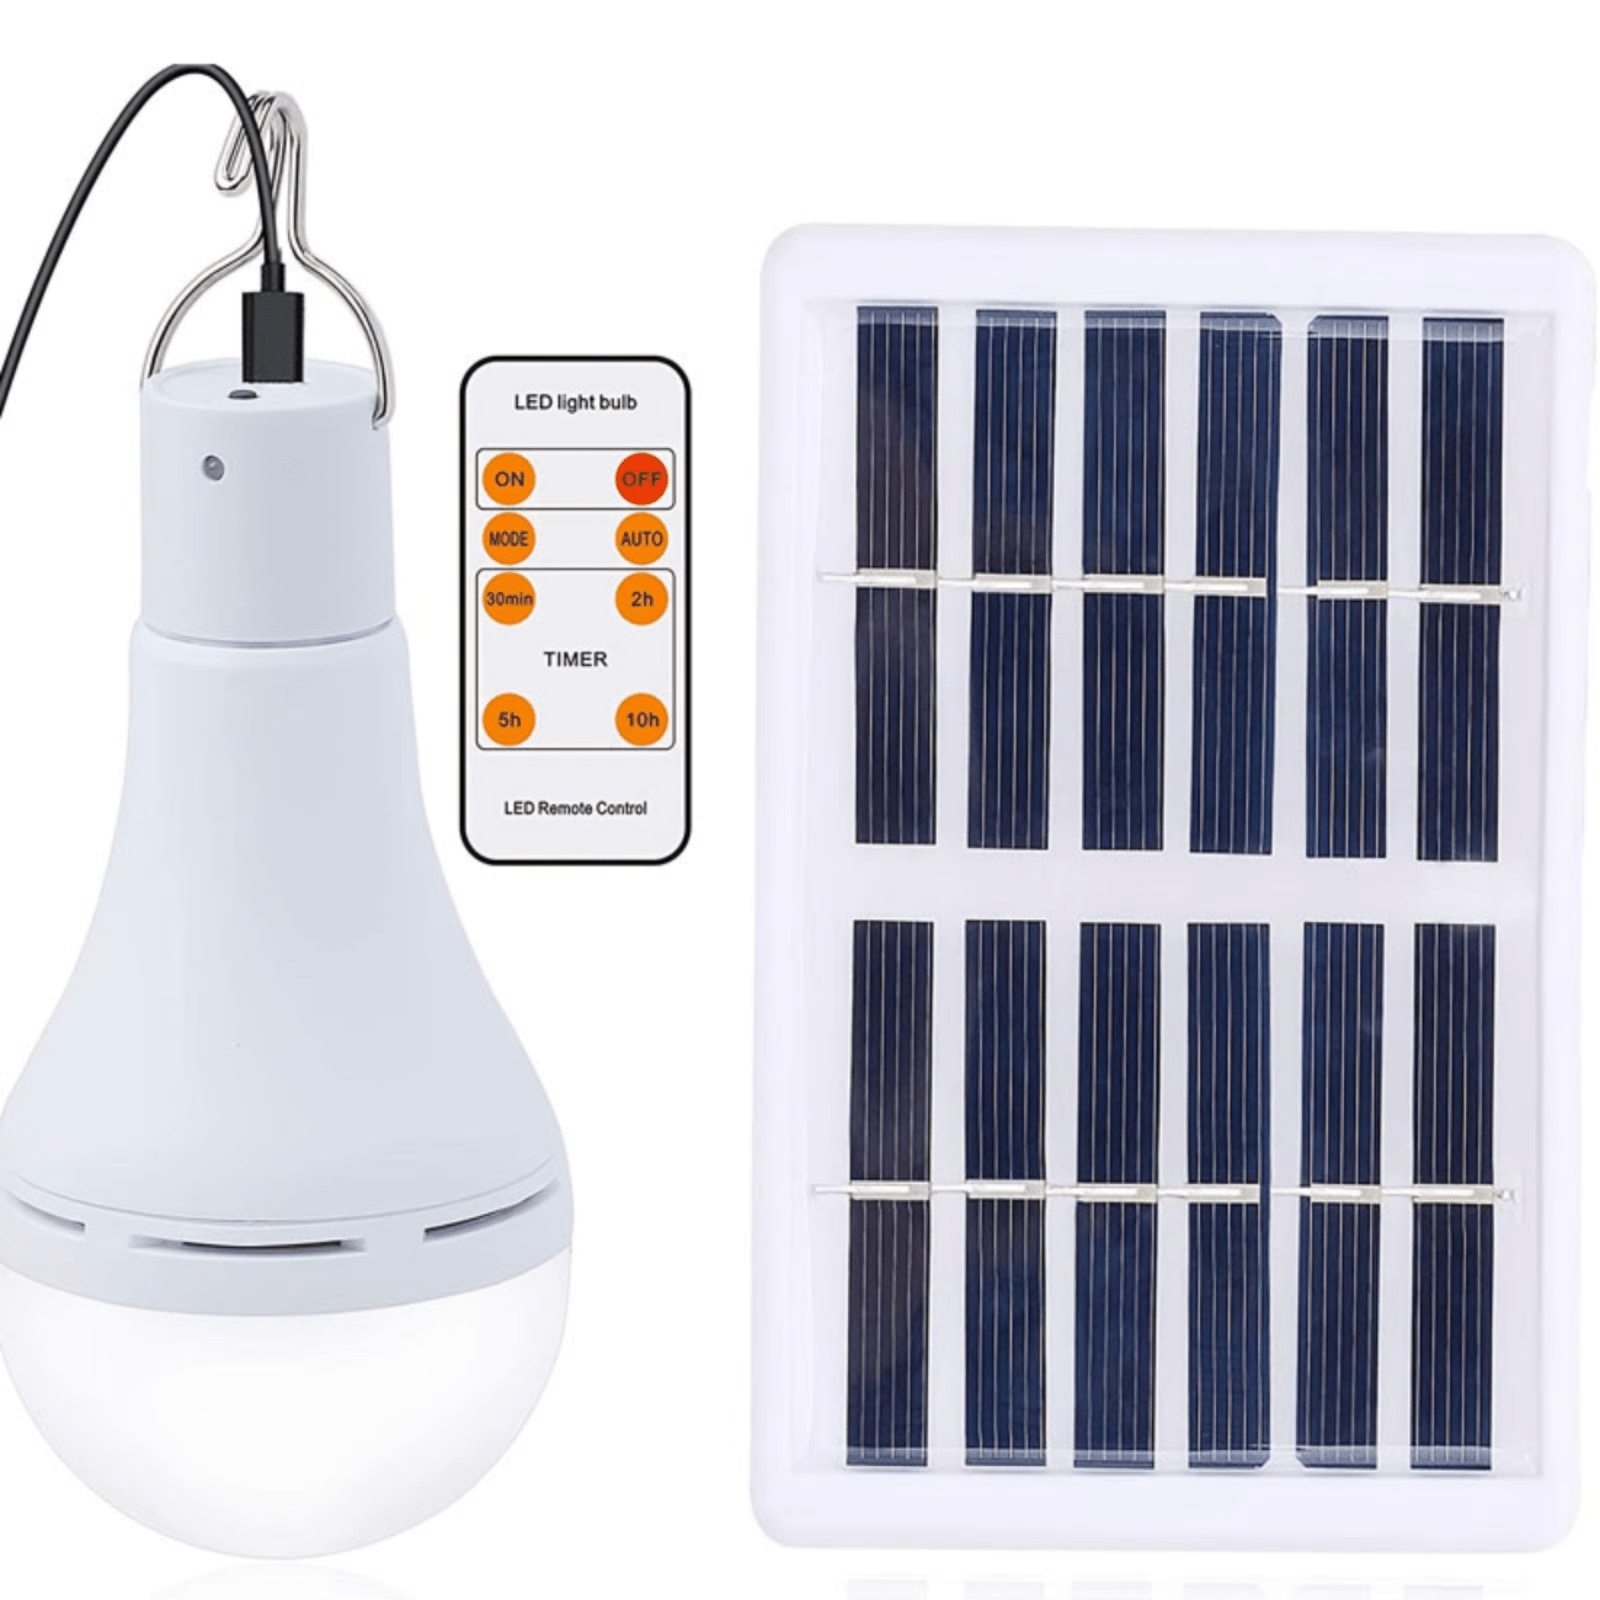 

1pc Led Solar Light Bulb, Outdoor Light Bulb With Remote & Timer, Led Light Bulb For Chicken Coops Shed, Hiking Camping Tent Hurricane Emergency Lighting